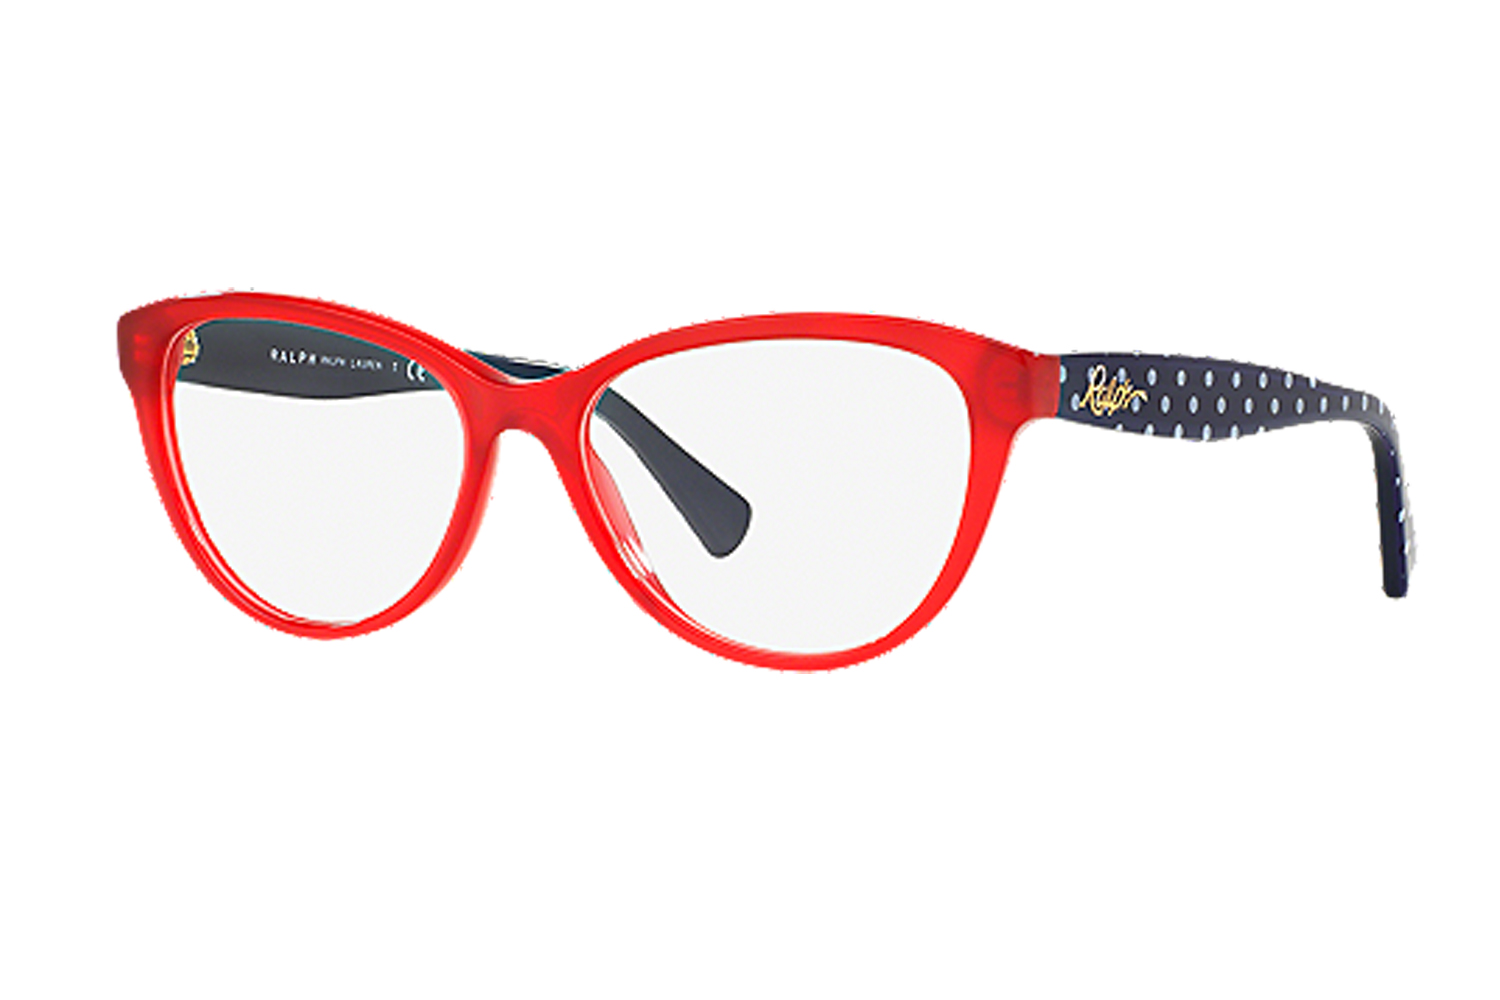 Ralph eyewear available at OPSM